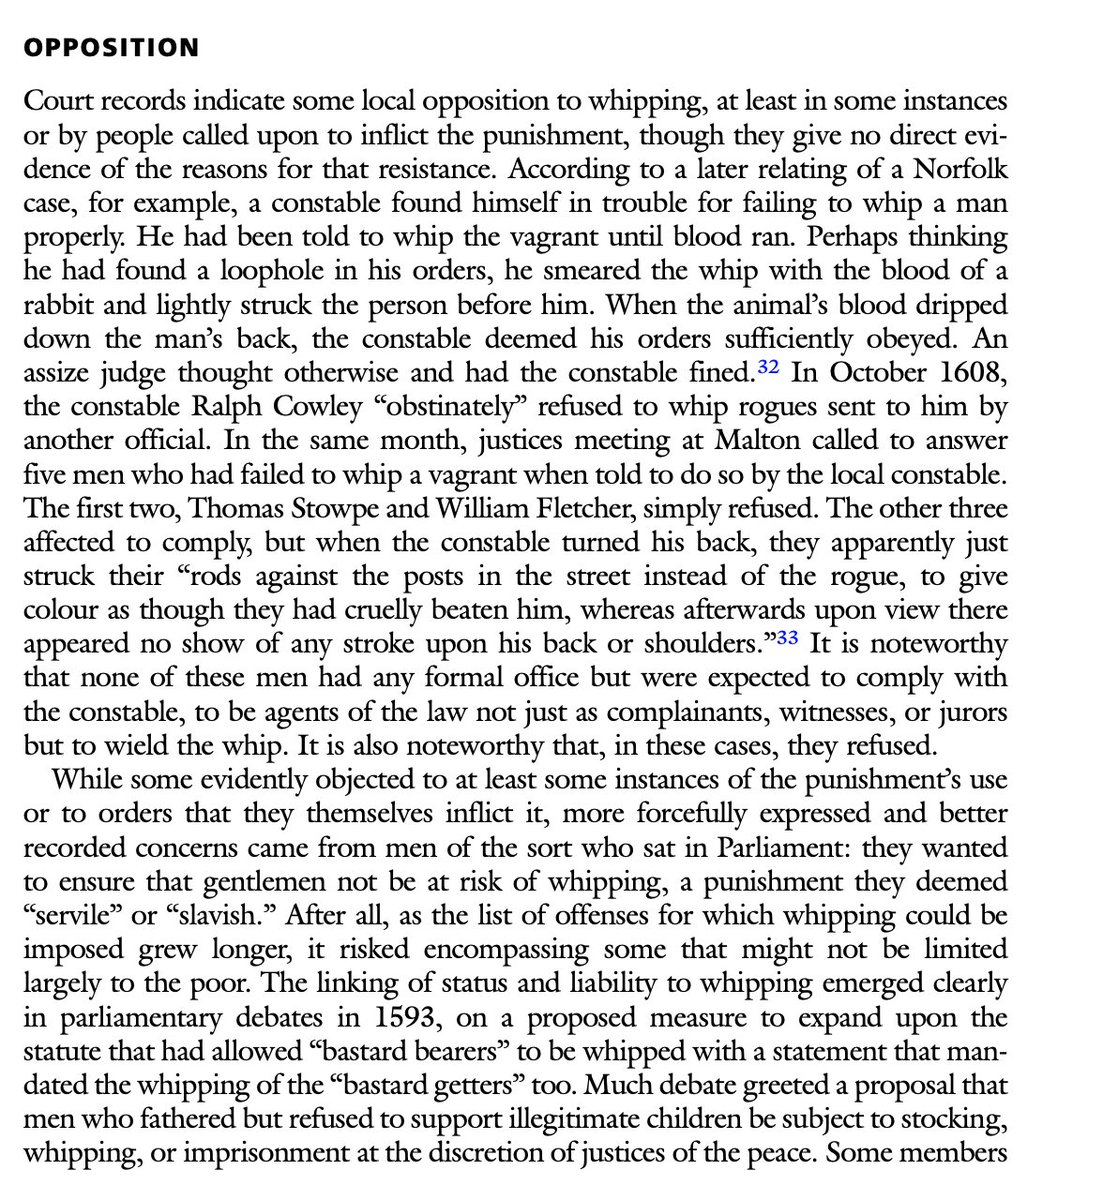 Interesting extracts from the article (p9): some constables actually refused to whip people, or at least halfheartedly enforced the order  https://twitter.com/KjKesselring/status/1385521045860401152